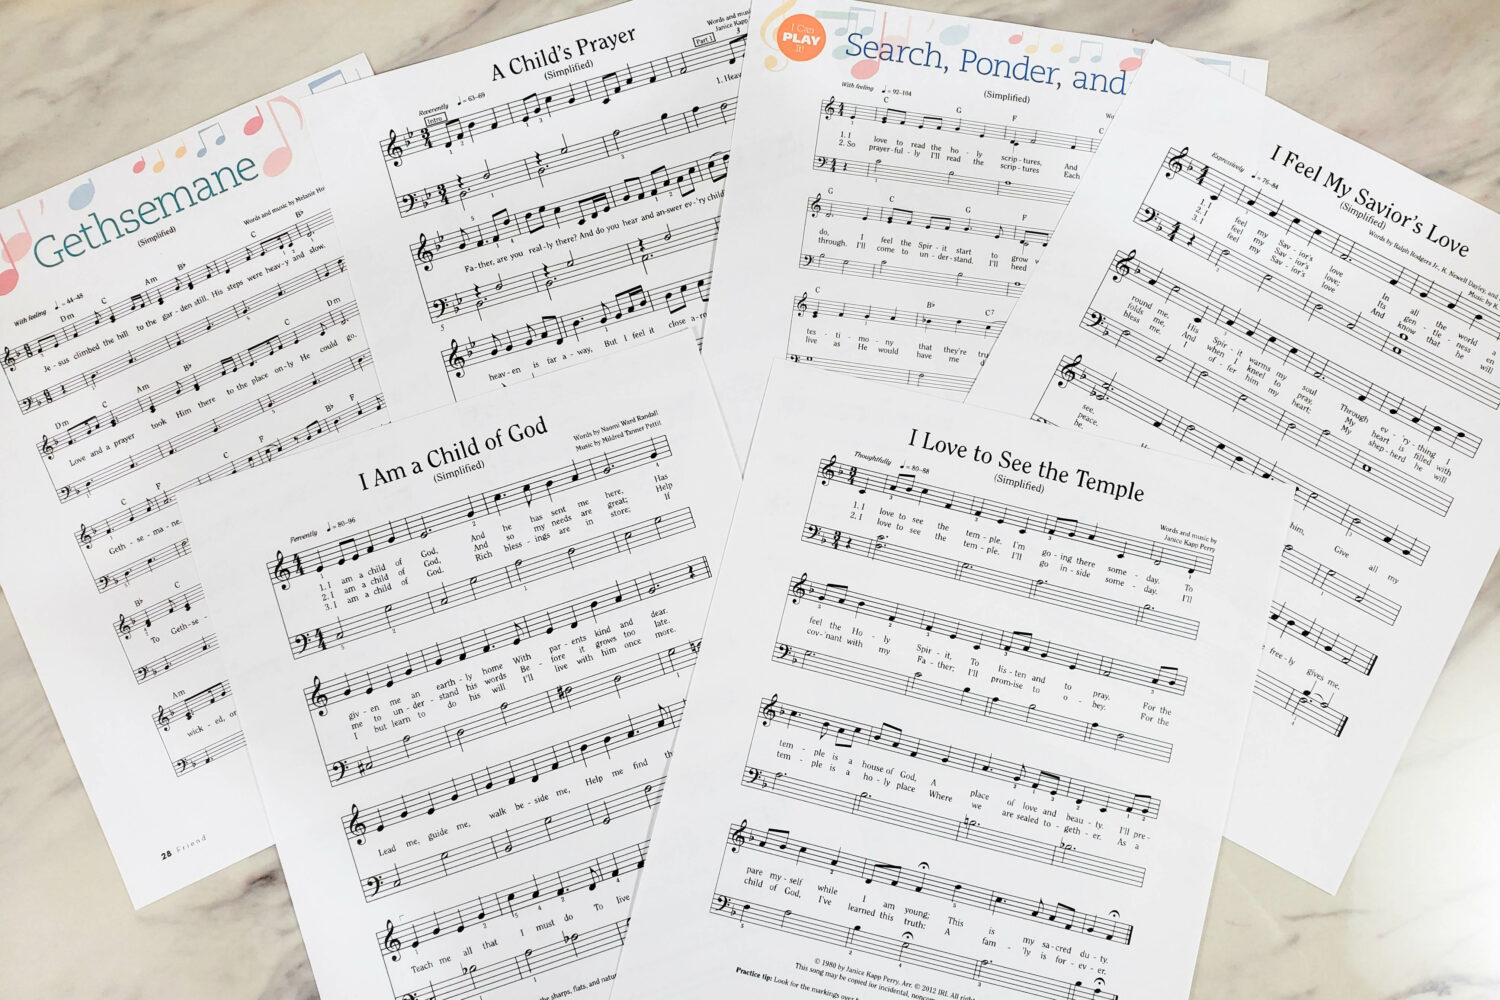 Utilize this master list of ALL the LDS Primary "I Can Play It" simplified sheet music! It includes a variety of songs from the Children's Songbook, a few from the hymn book, and even some songs from the Friend magazine. Great resource to help music leaders planning their singing time activities and even the Primary program.